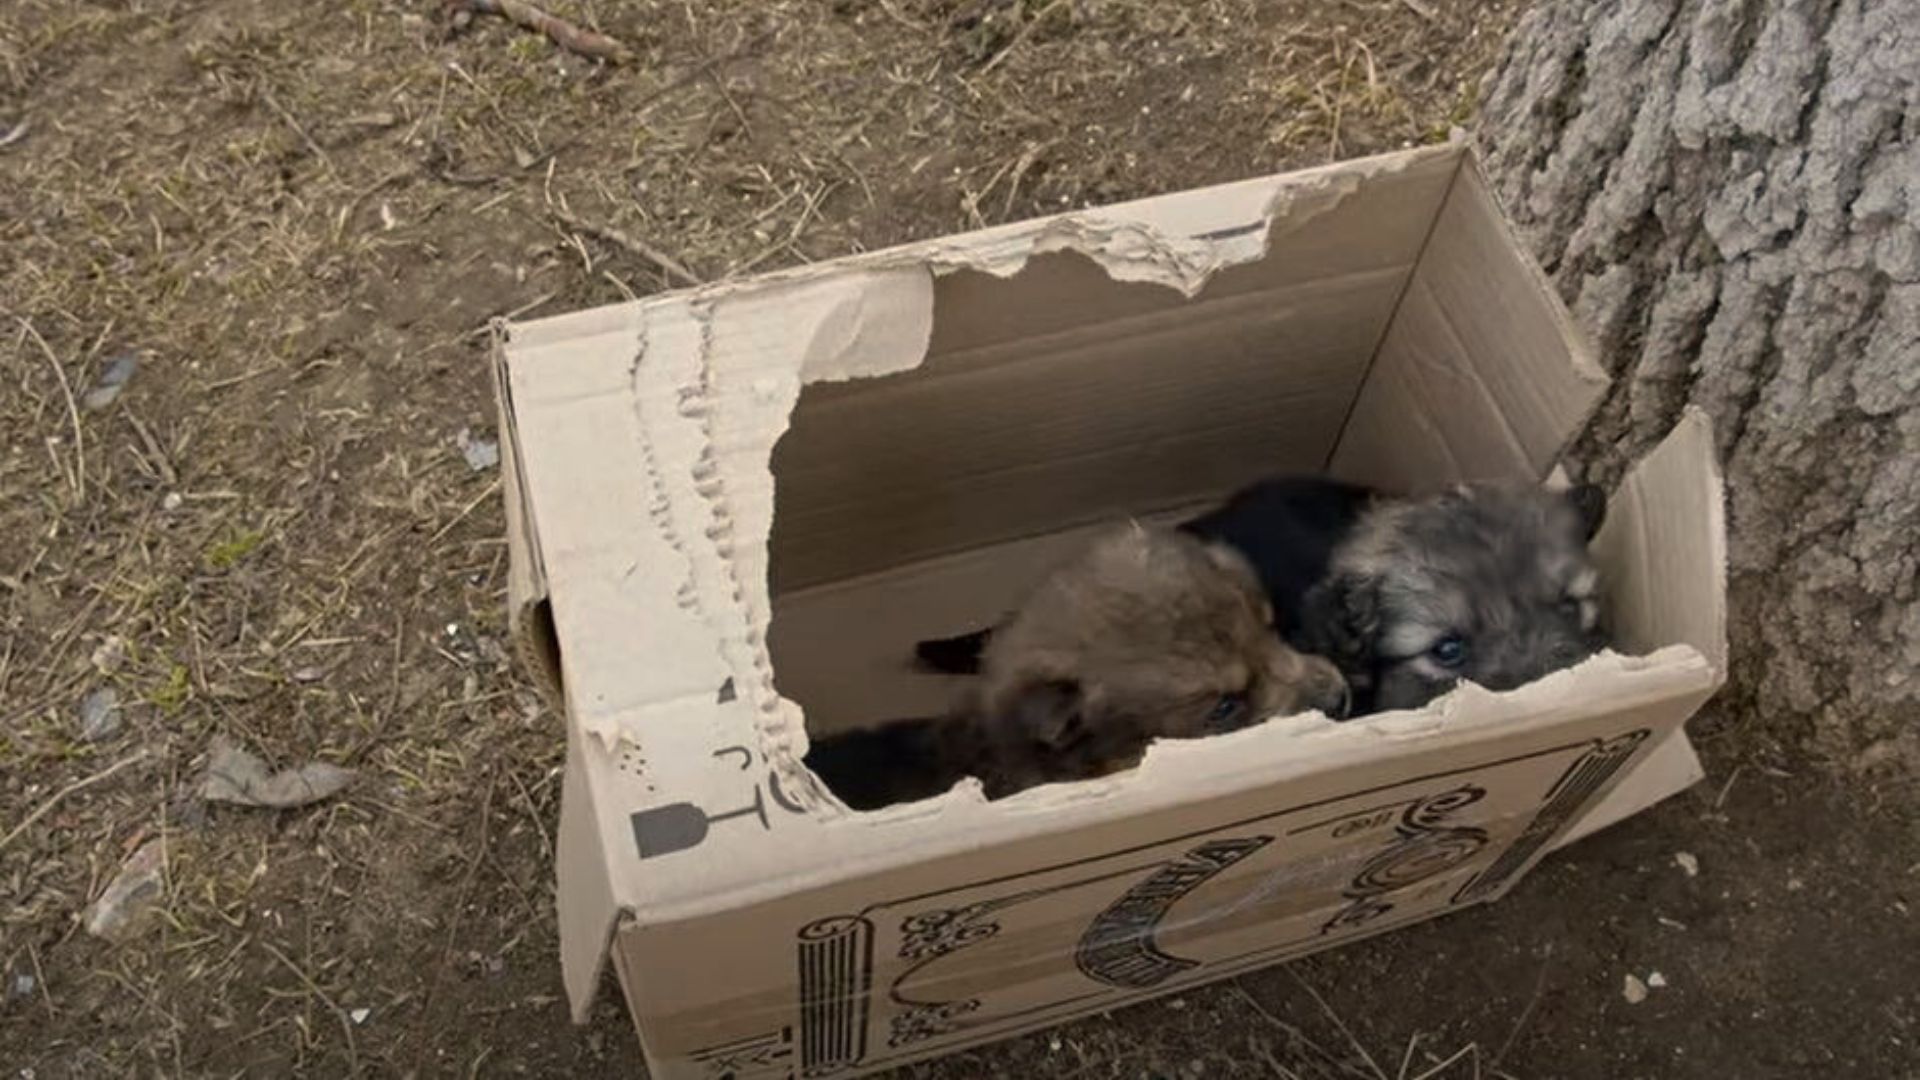 Man Couldn’t Believe What He Found Inside A Cardboard Box Near A Road